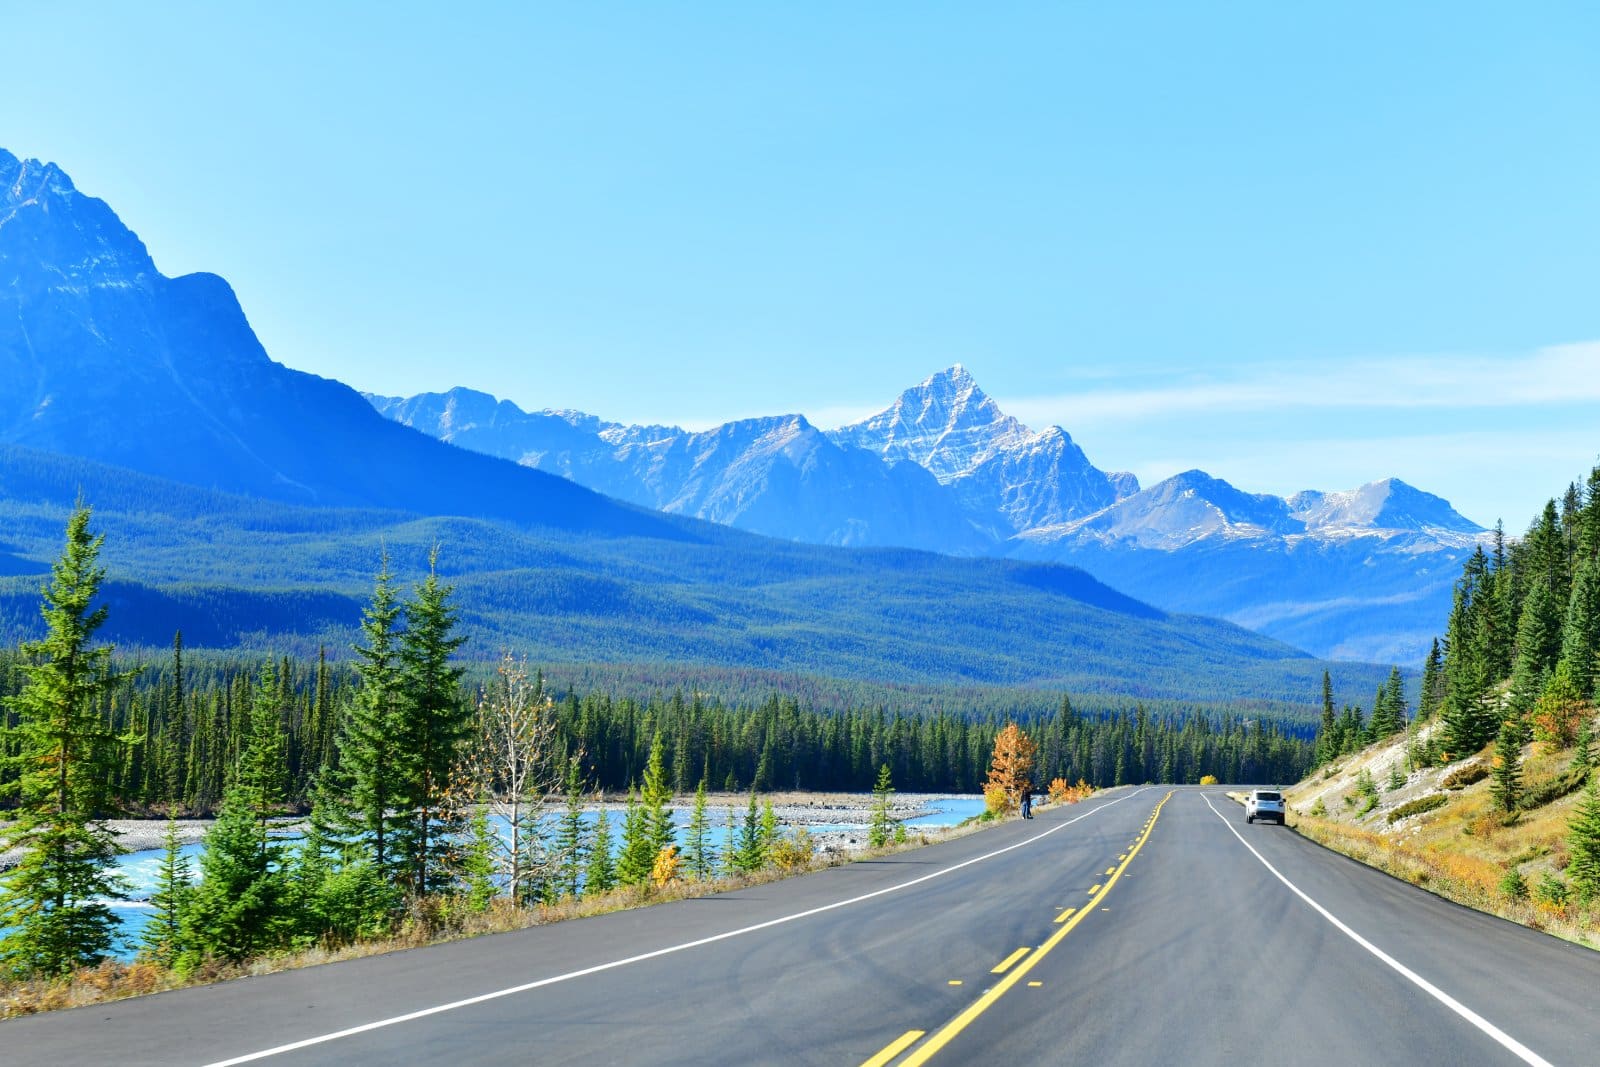 <p class="wp-caption-text">Image Credit: Shutterstock / i viewfinder</p>  <p><span>The Icefields Parkway, stretching 232 kilometers between Lake Louise and Jasper, is more than just a road—it’s a journey through the heart of the Canadian Rockies’ most spectacular landscapes. This world-renowned scenic drive passes by ancient glaciers, cascading waterfalls, and turquoise lakes, offering countless opportunities for exploration and photography. Notable stops along the route include the Crowfoot Glacier, Peyto Lake, and the Athabasca Glacier at the Columbia Icefield.</span></p>